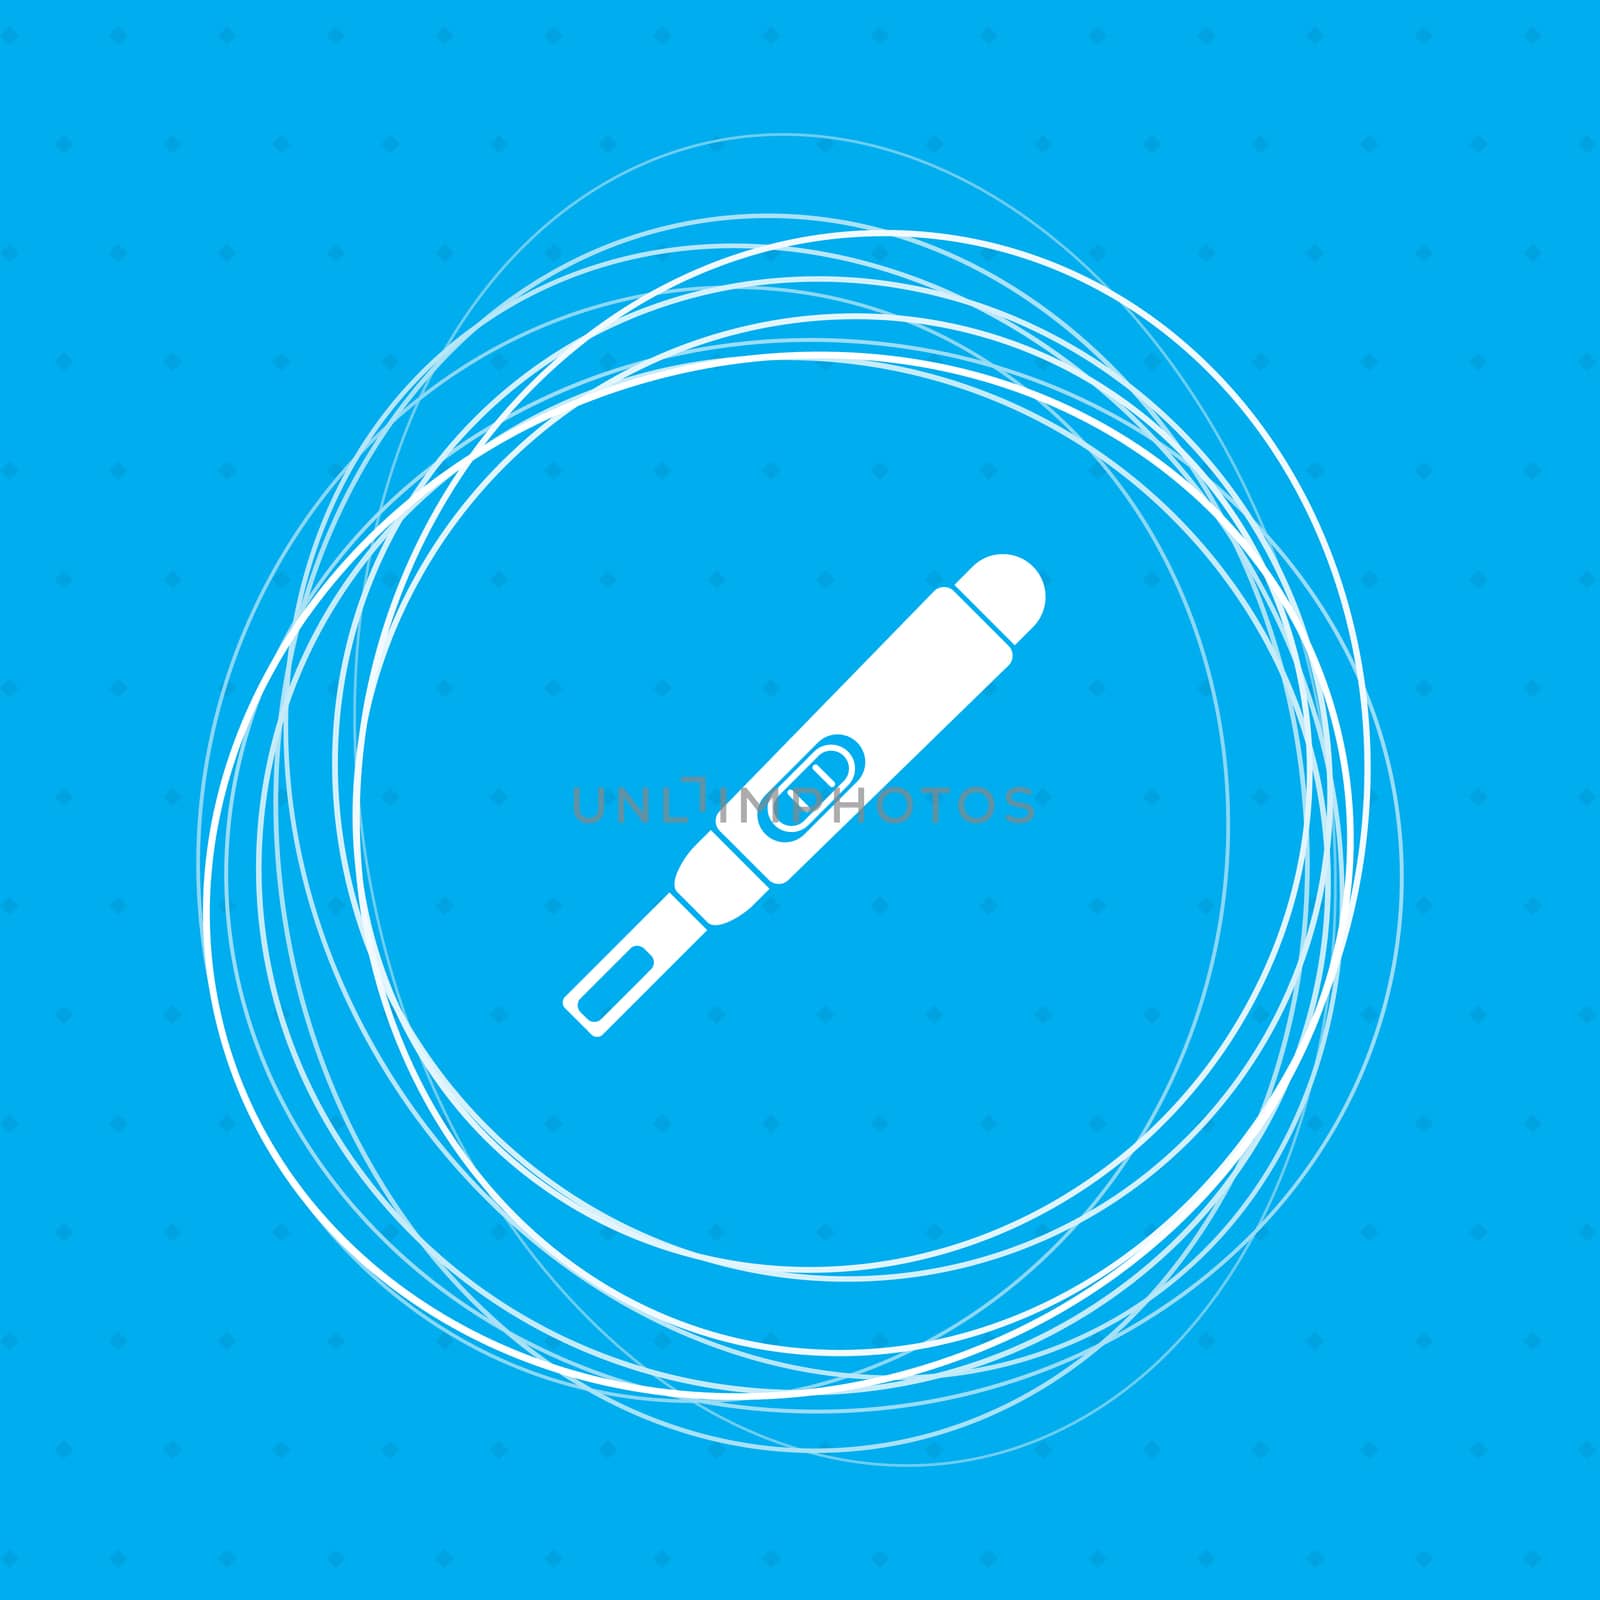 Pregnancy test icon on a blue background with abstract circles around and place for your text. illustration